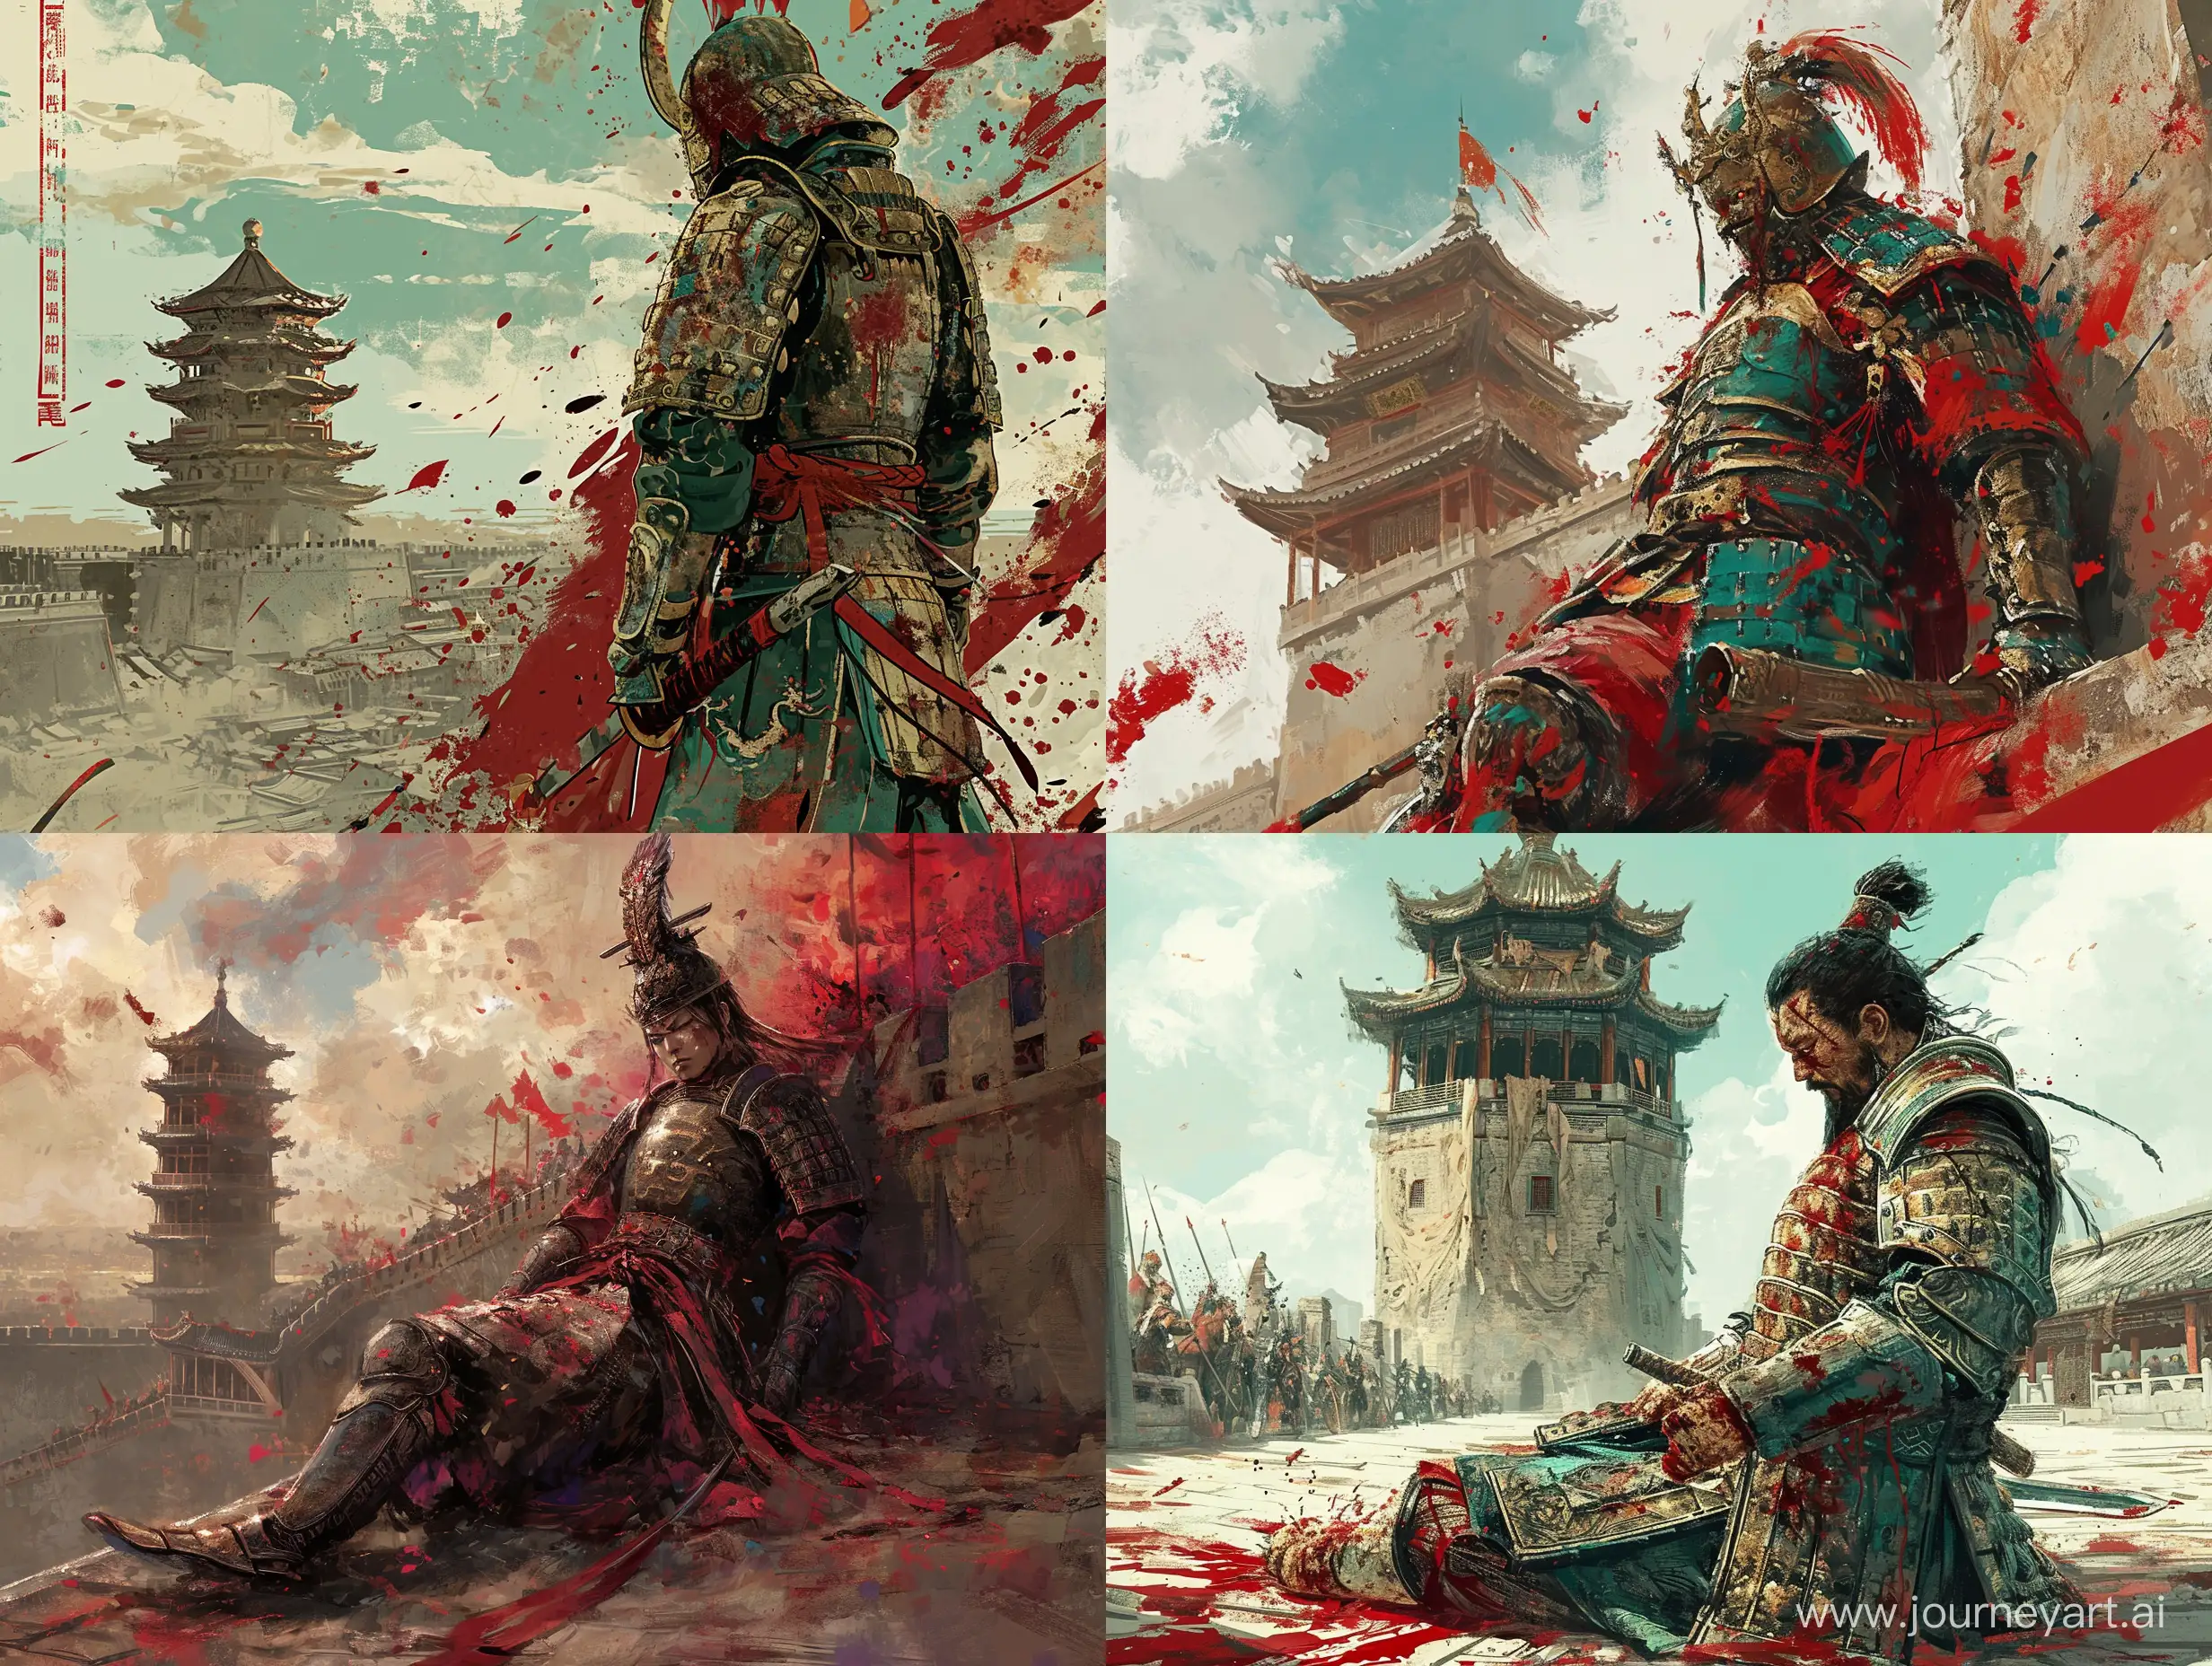 Colorful-Chinese-Style-General-in-Armor-Slain-Under-City-Tower